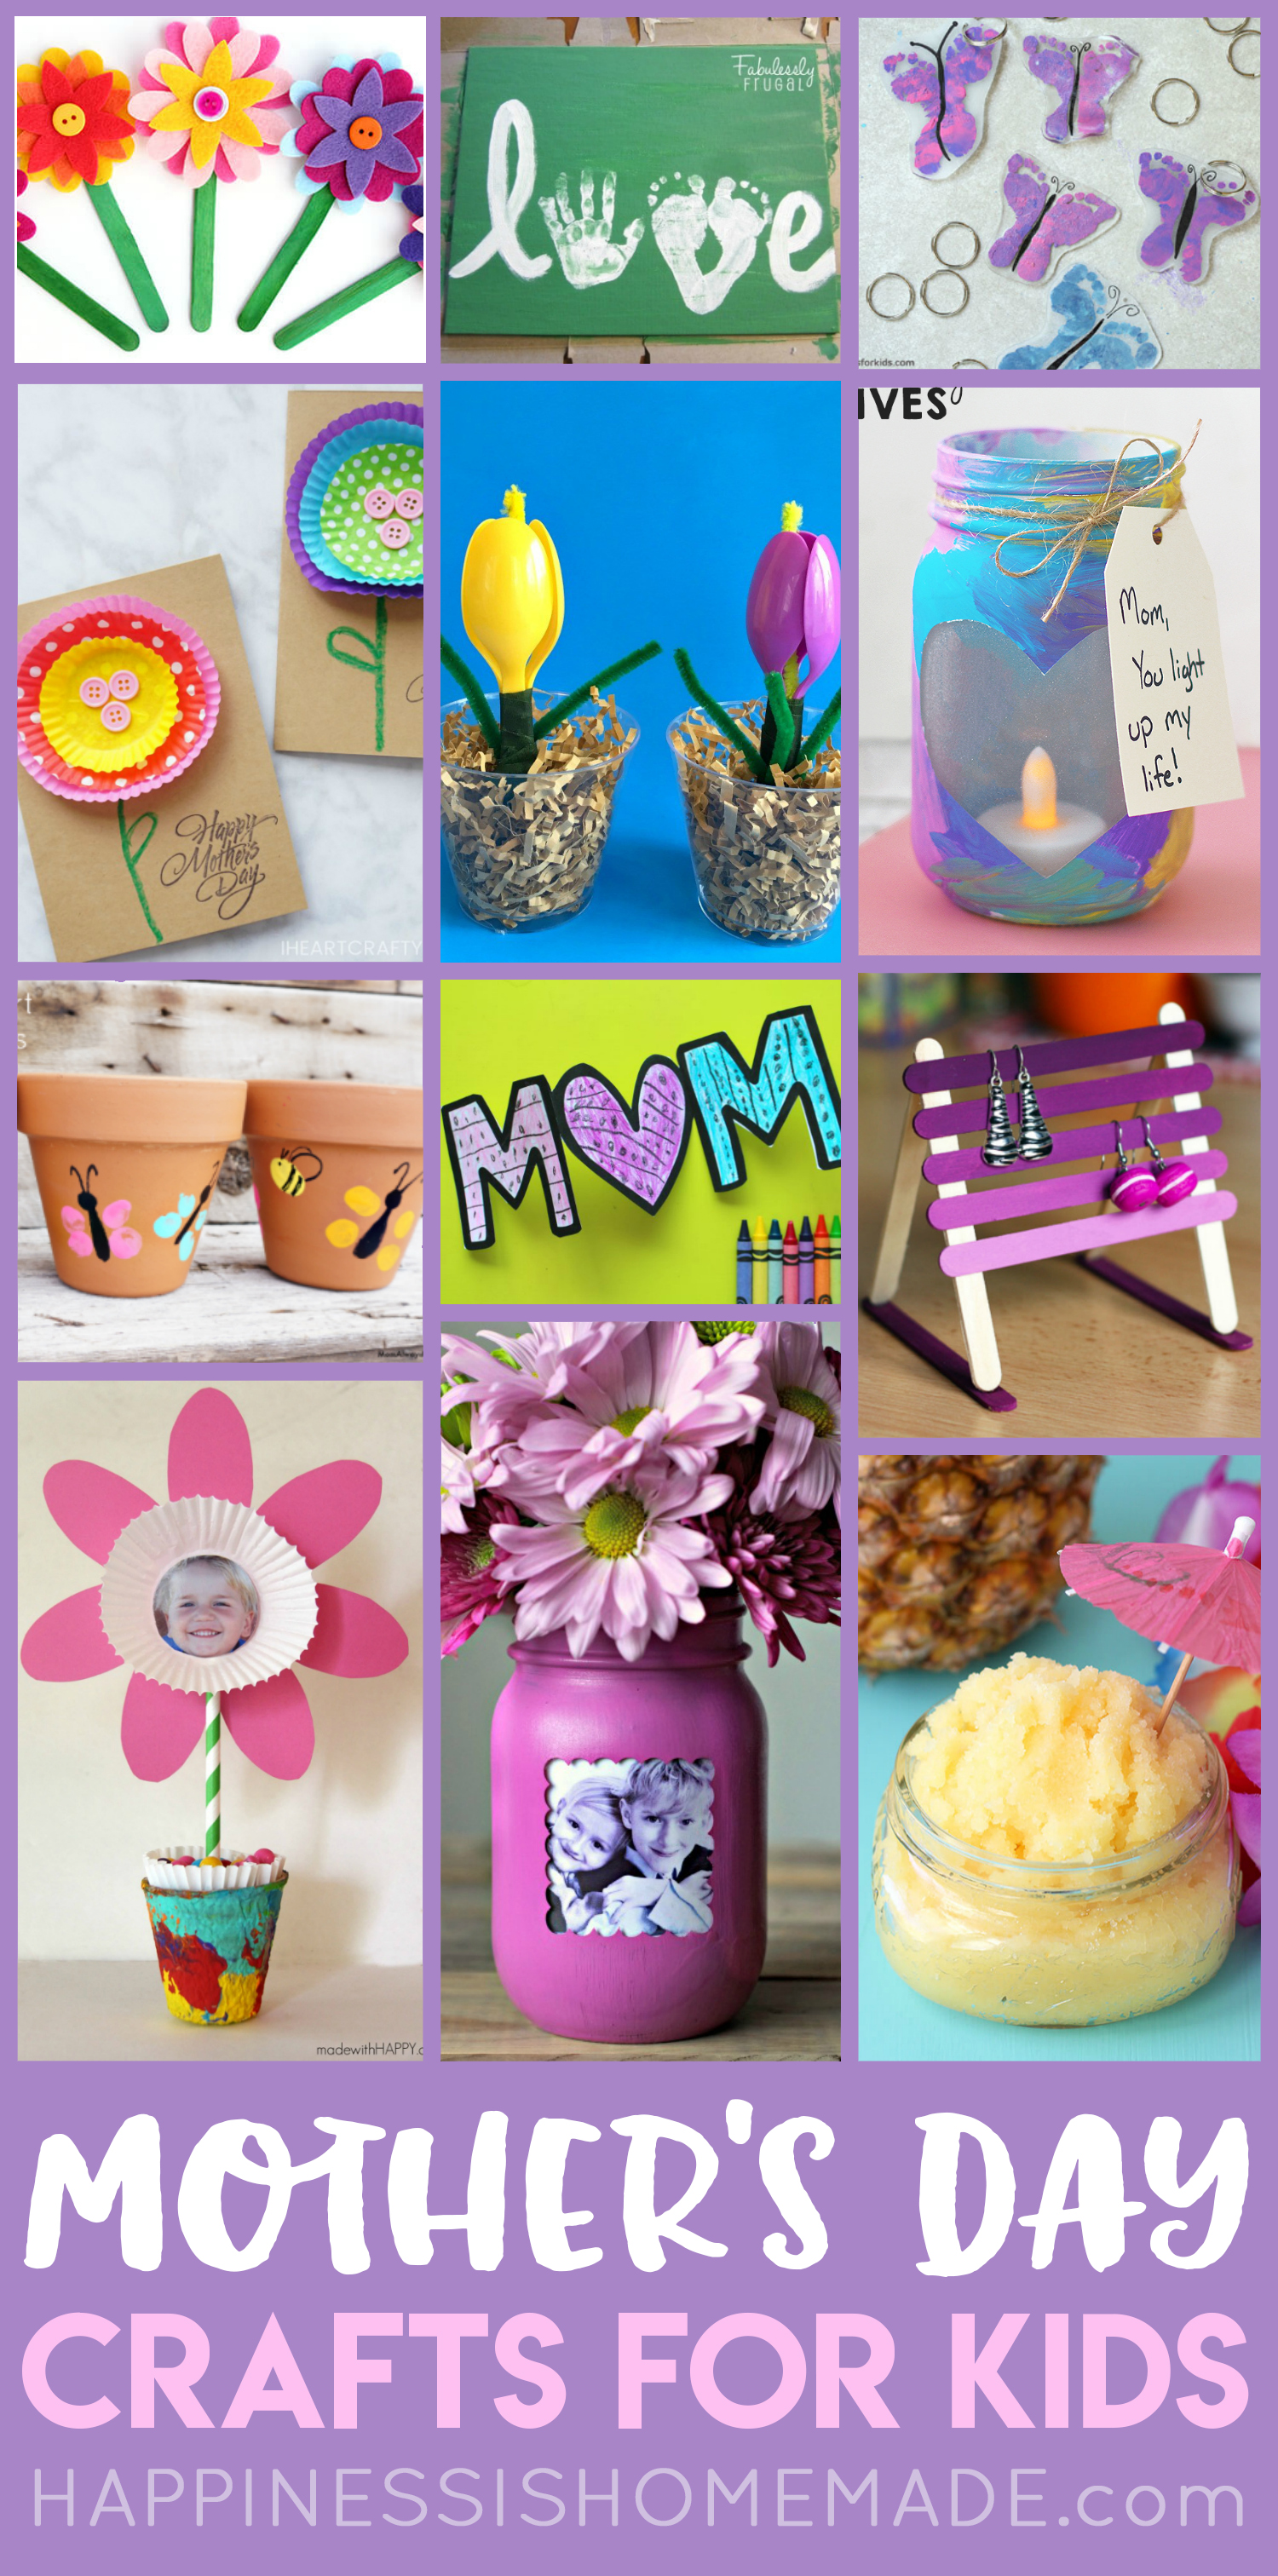 Easy Mother's Day Crafts for Kids Happiness is Homemade